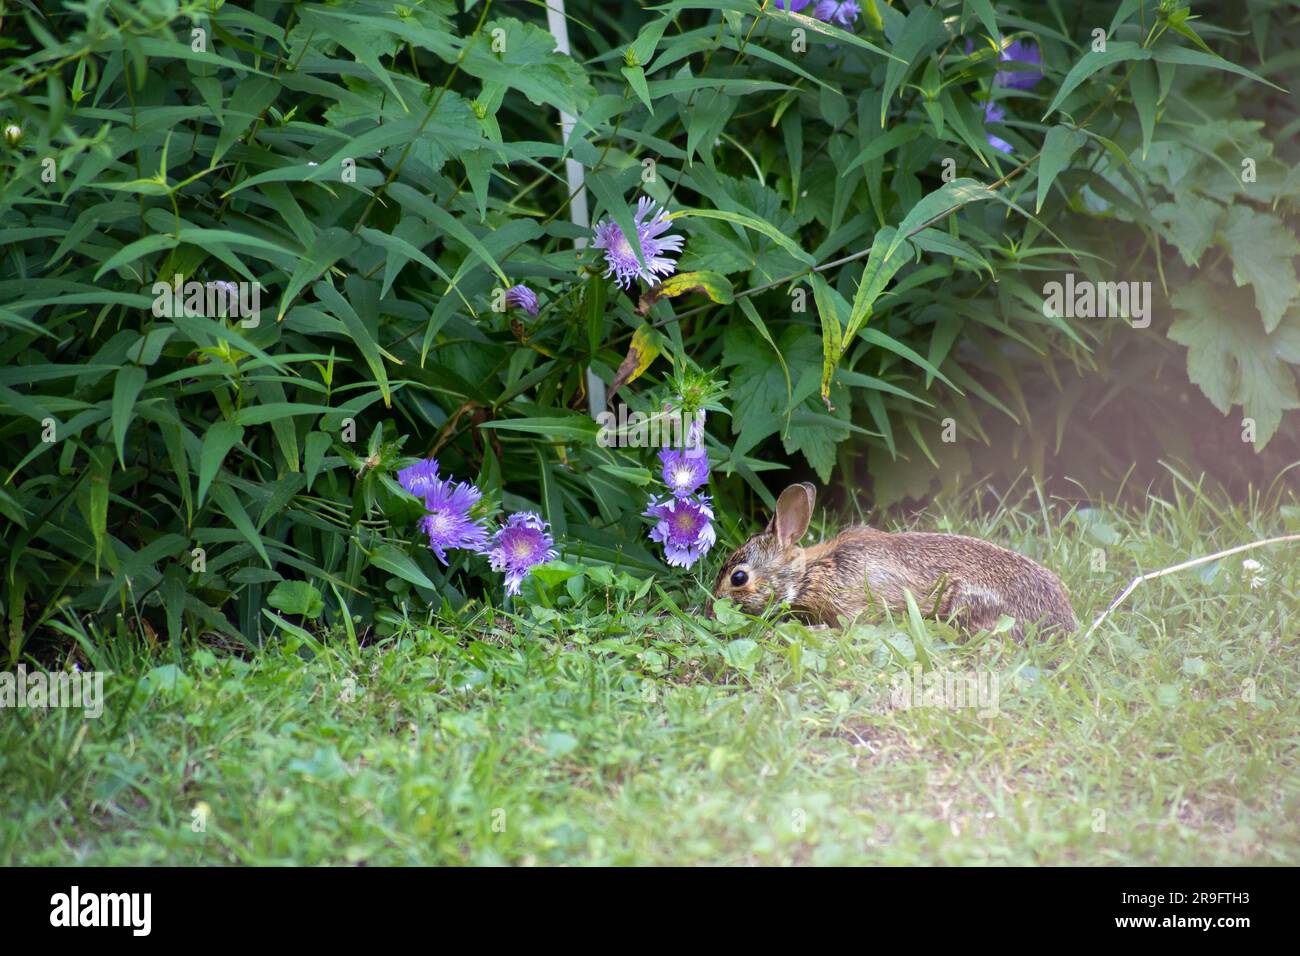 A young eastern cottontail rabbit (Sylvilagus floridanus) nibbles on clover under the purple flowers of Stokes' Aster (Stokesia laevis) in a garden Stock Photo